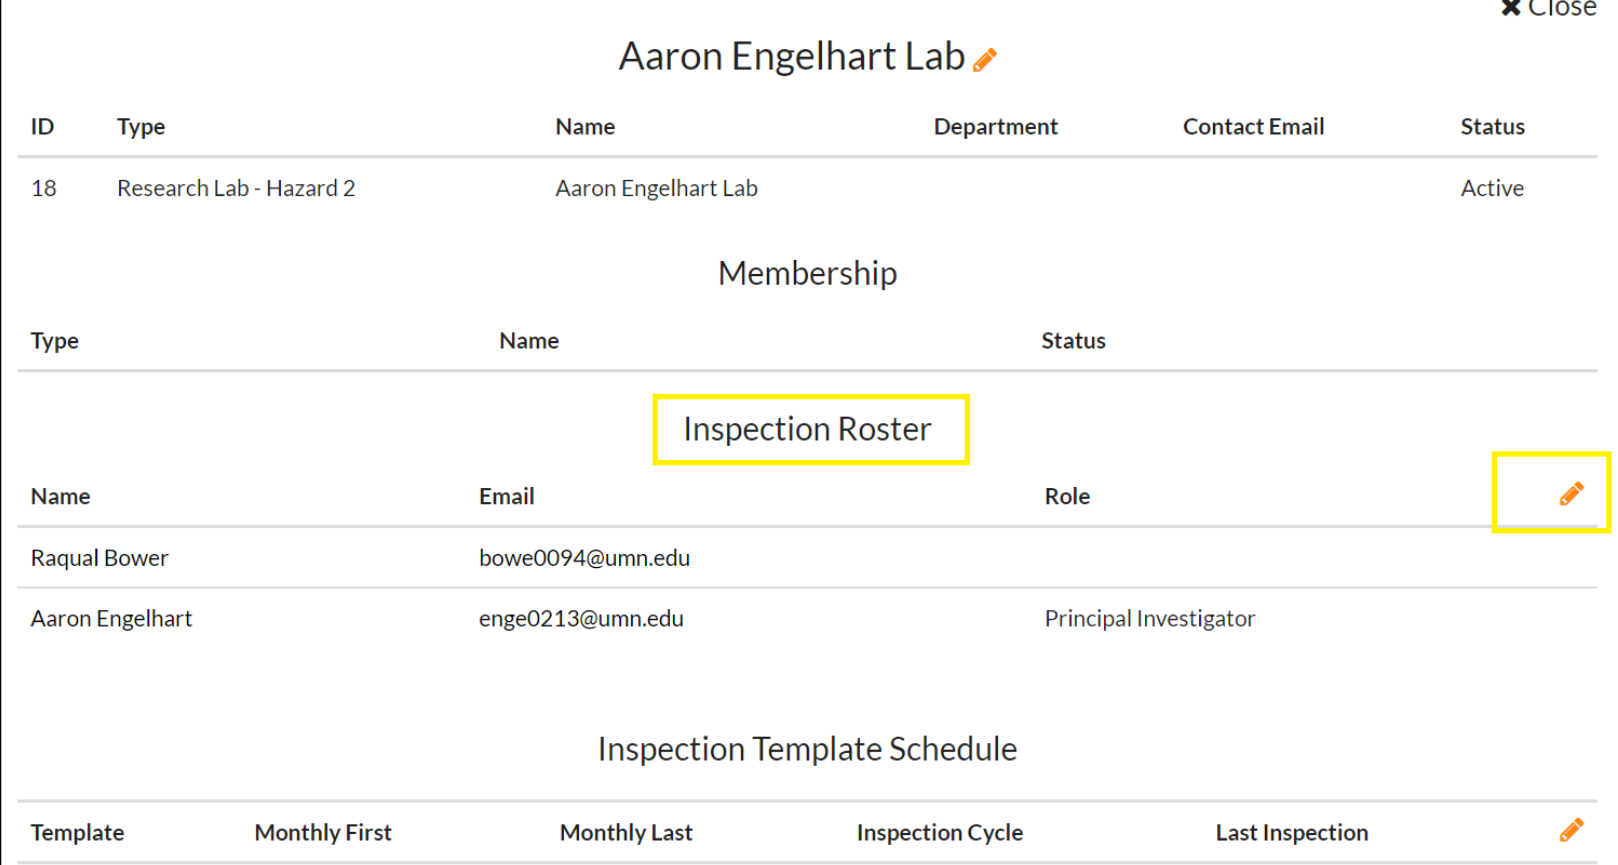 Inspection roster and pencil icon for editing identified for a lab